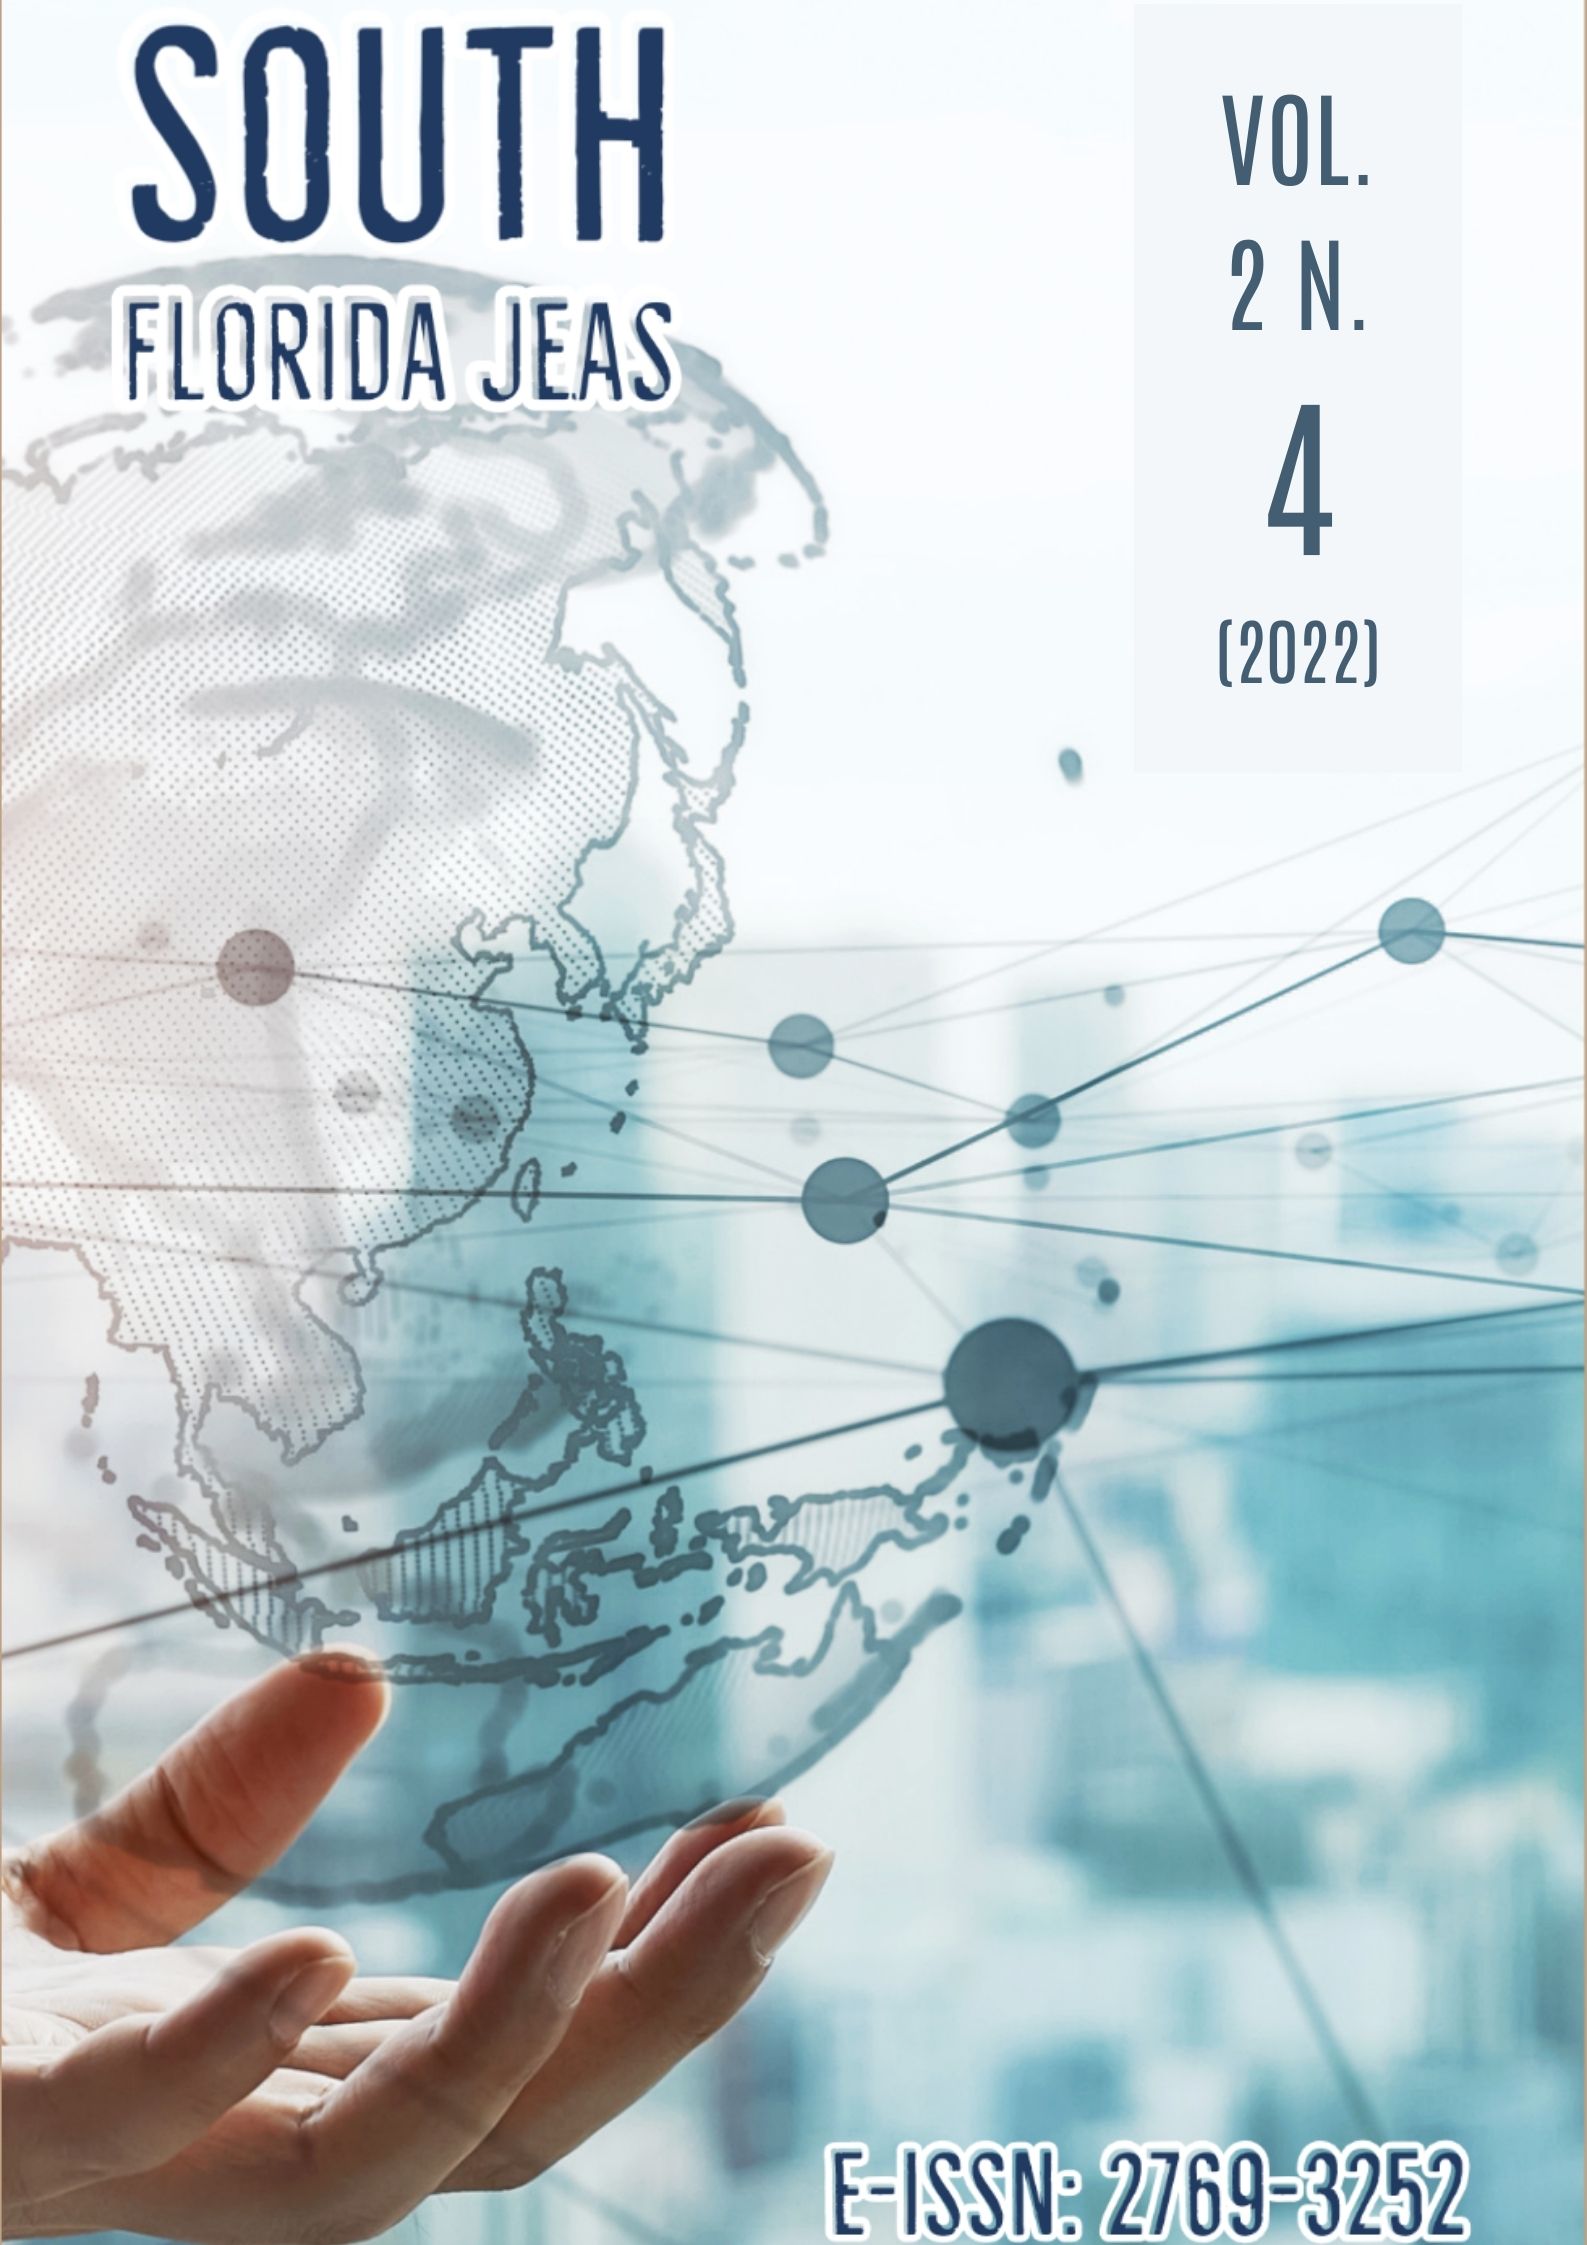 					View Vol. 2 No. 4 (2022): South Florida Journal of Environmental and Animal Science, Miami, v. 2, n. 4, oct./dec. 2022
				